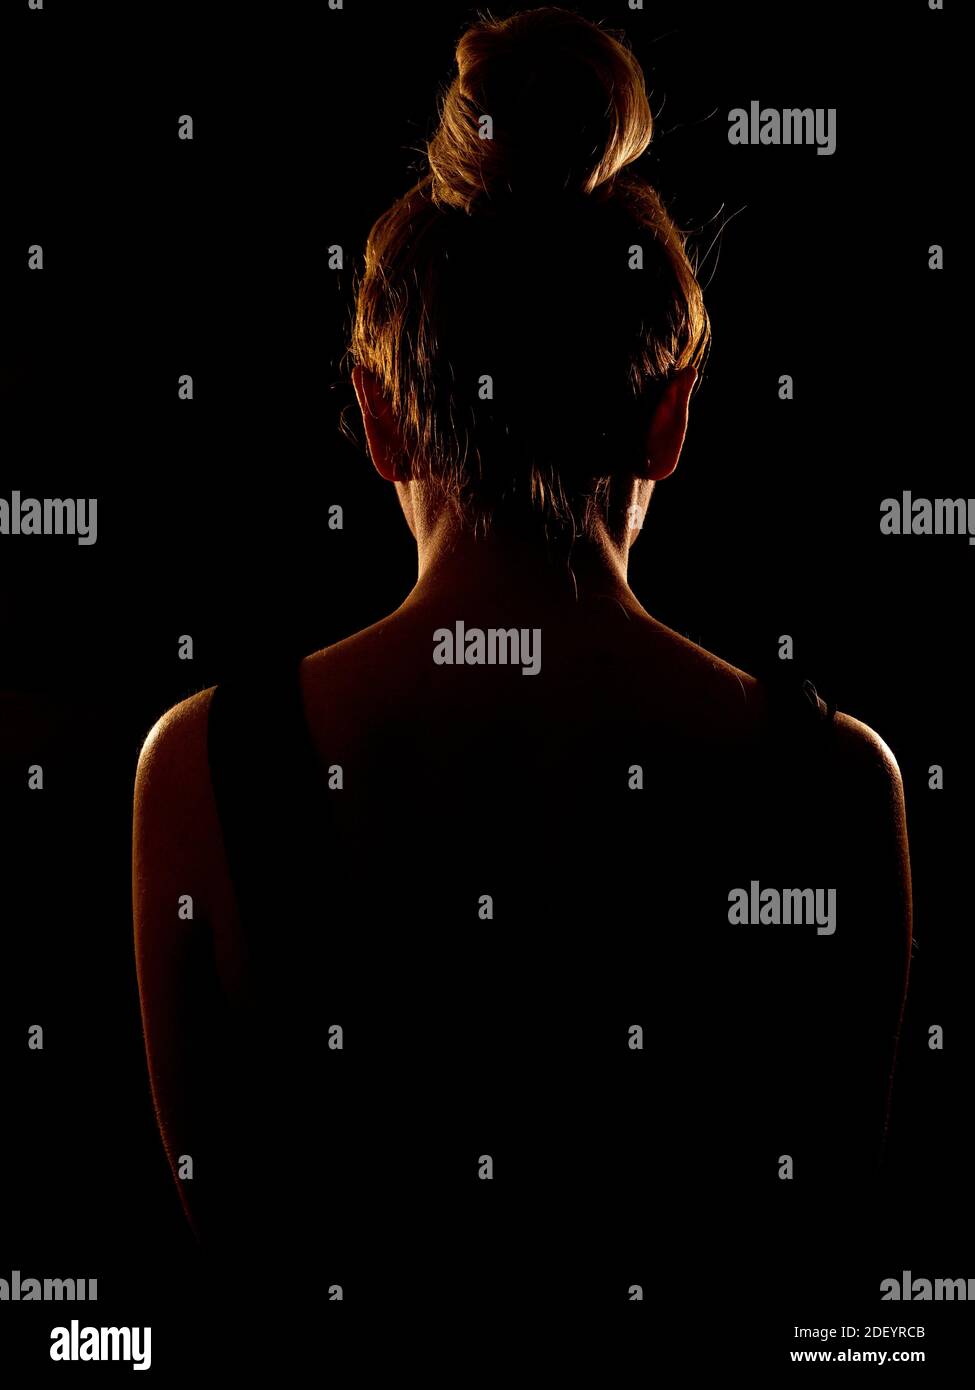 rear view of a woman with hair in a bun, in rim light Stock Photo